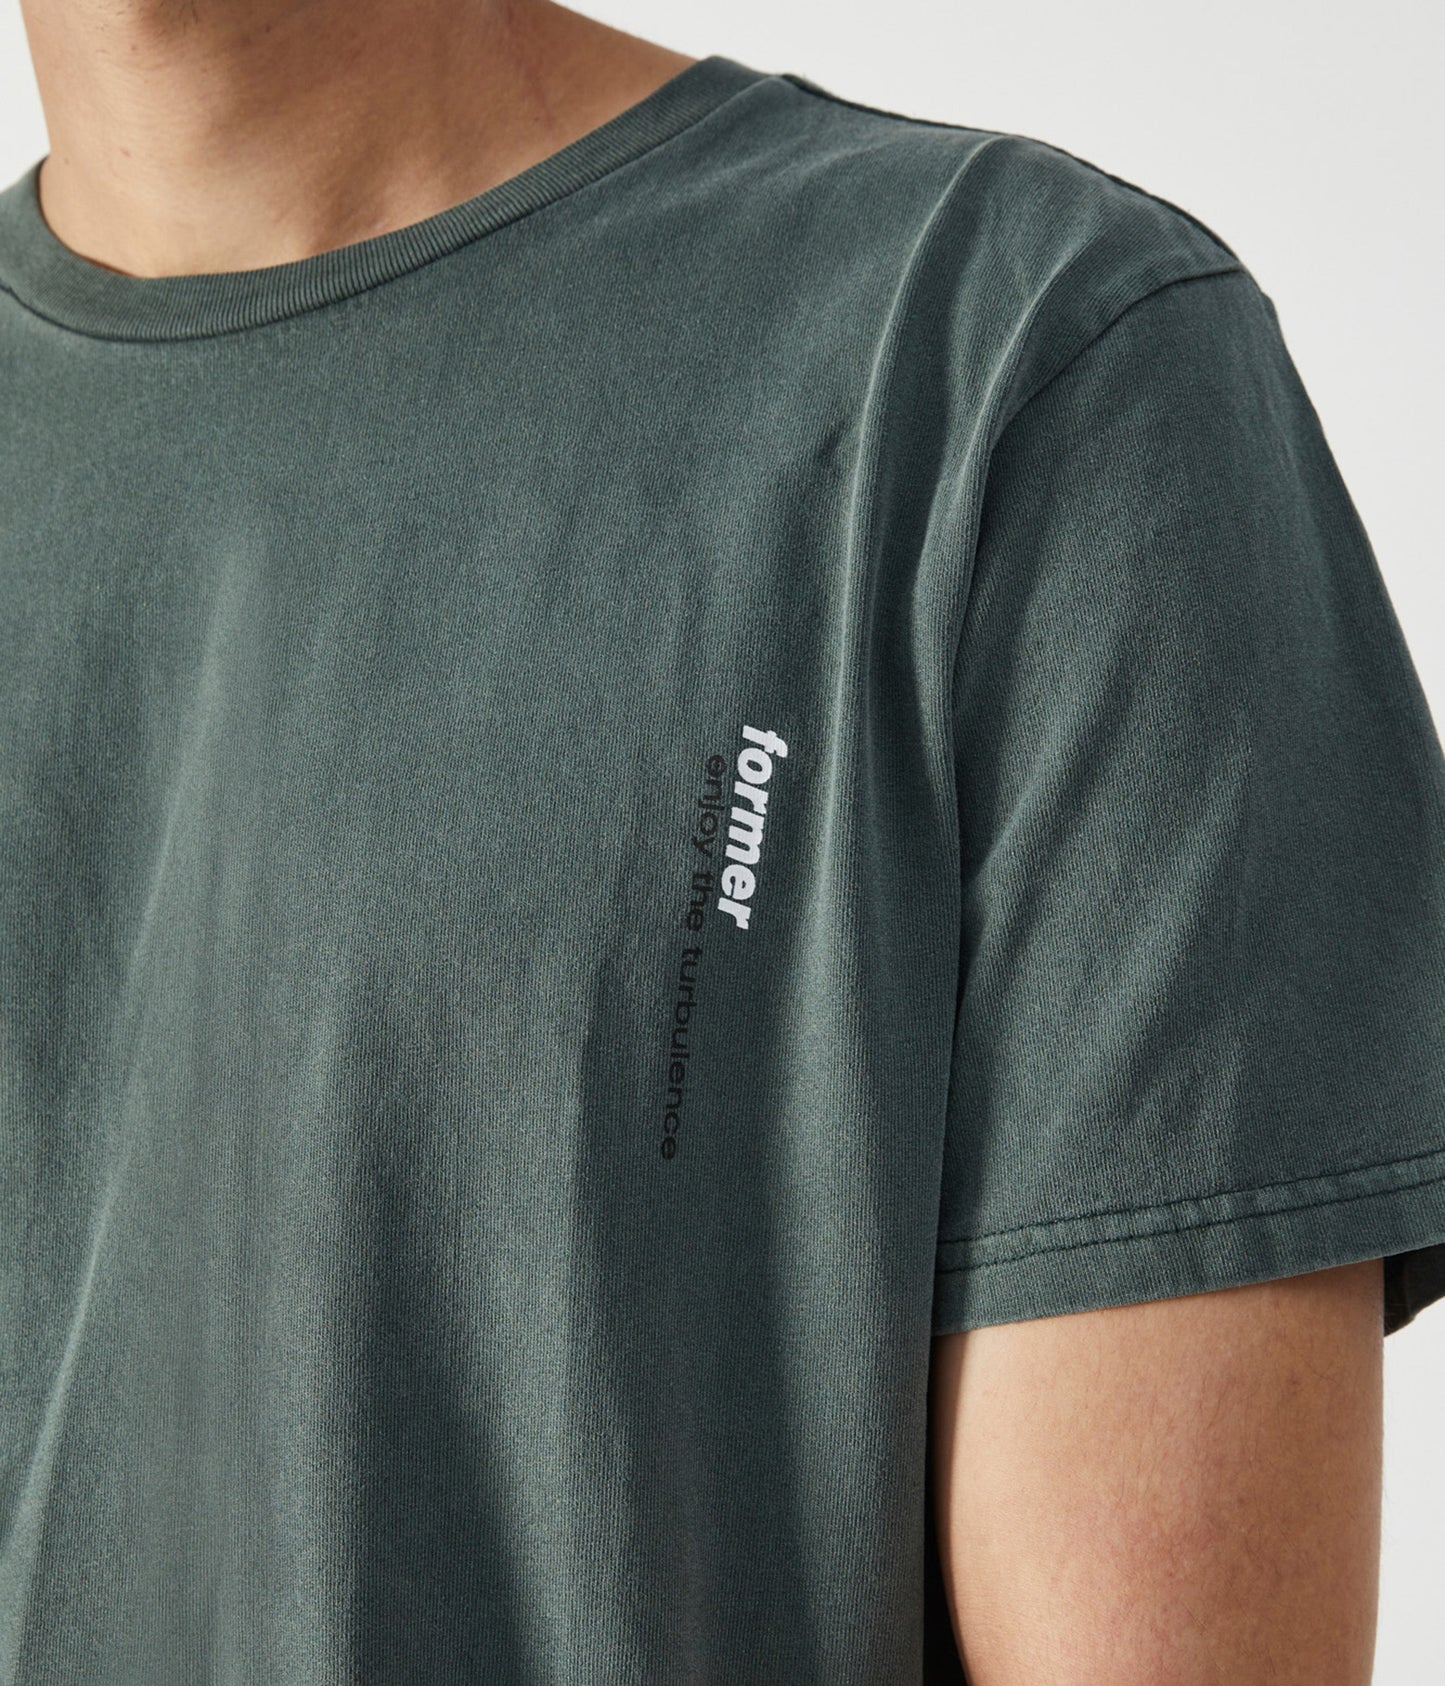 ALL PURPOSE T-SHIRT // WASHED BOTTLE